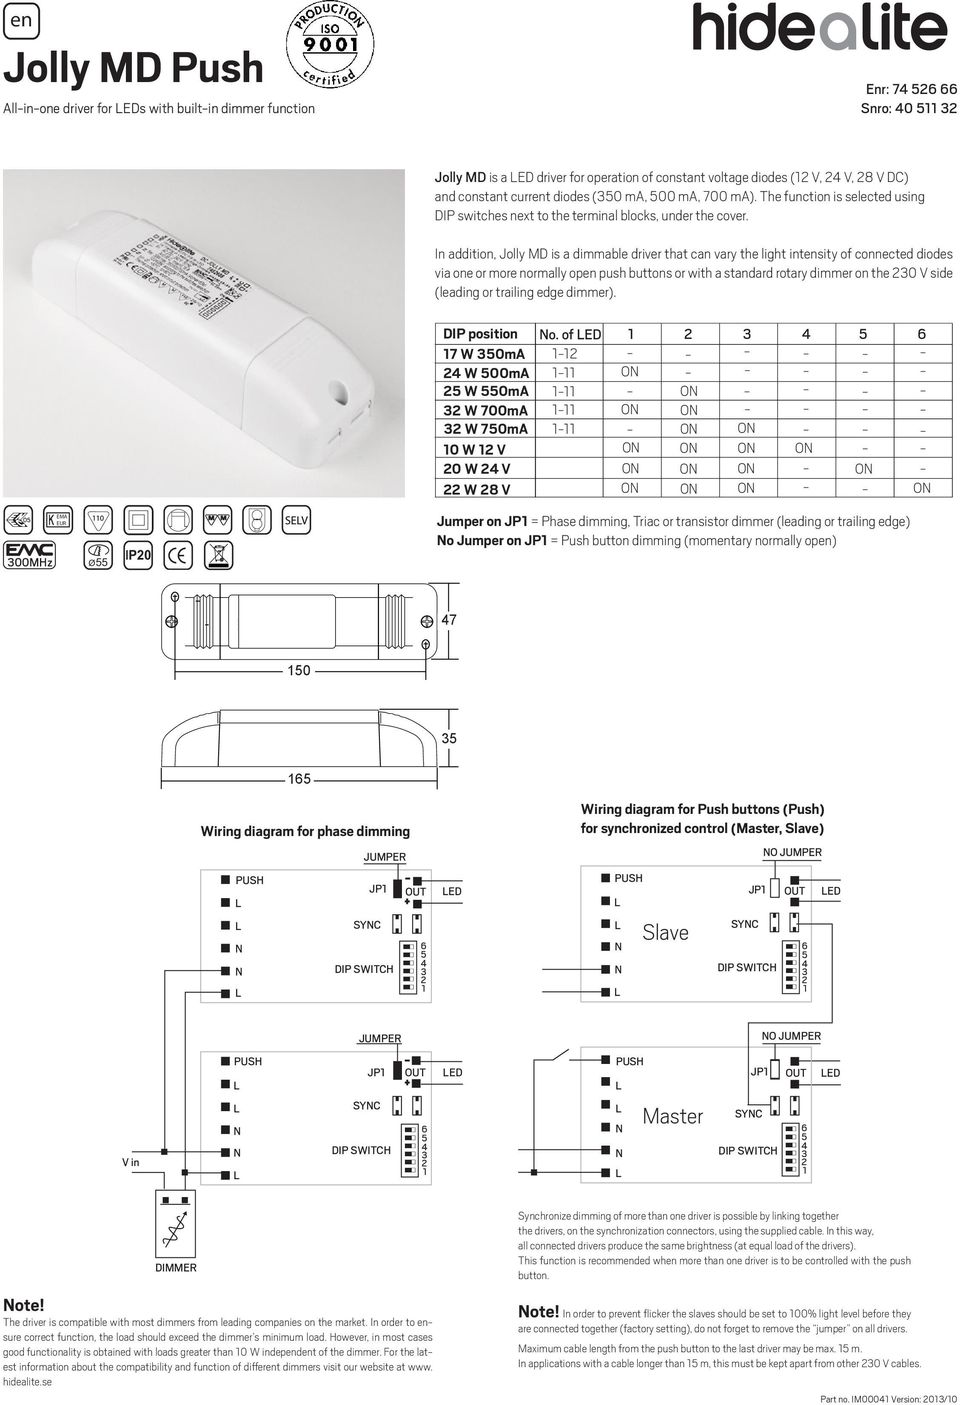 In addition, Jolly MD is a dimmable driver that can vary the light intensity of connected diodes via one or more normally open push buttons or with a standard rotary dimmer on the 0 V side (leading